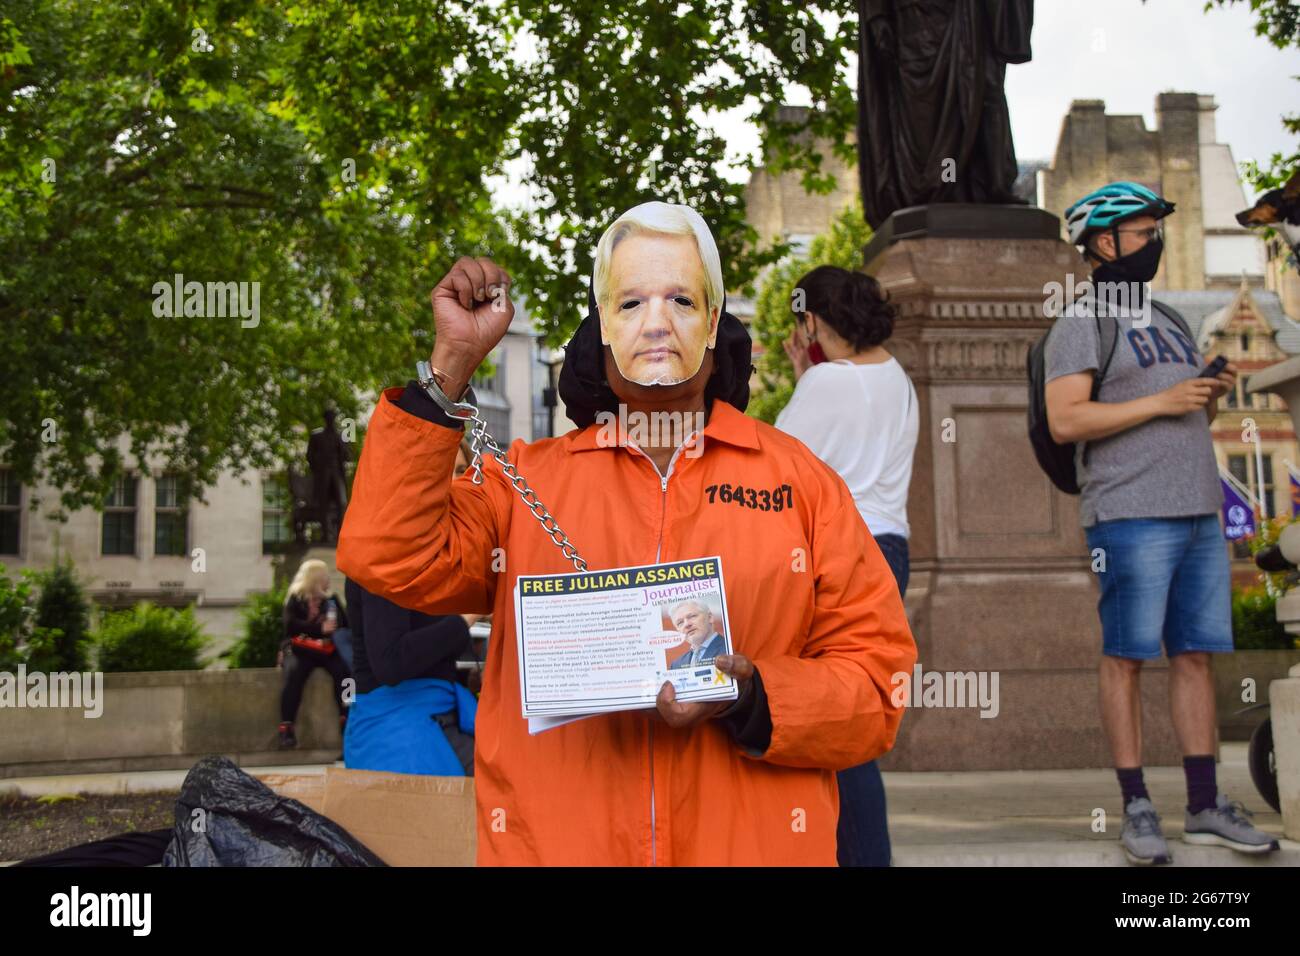 London, United Kingdom. 3rd July 2021. Protesters gathered at Parliament Square demanding the release of WikiLeaks founder Julian Assange, on his 50th birthday. (Credit: Vuk Valcic / Alamy Live News) Stock Photo